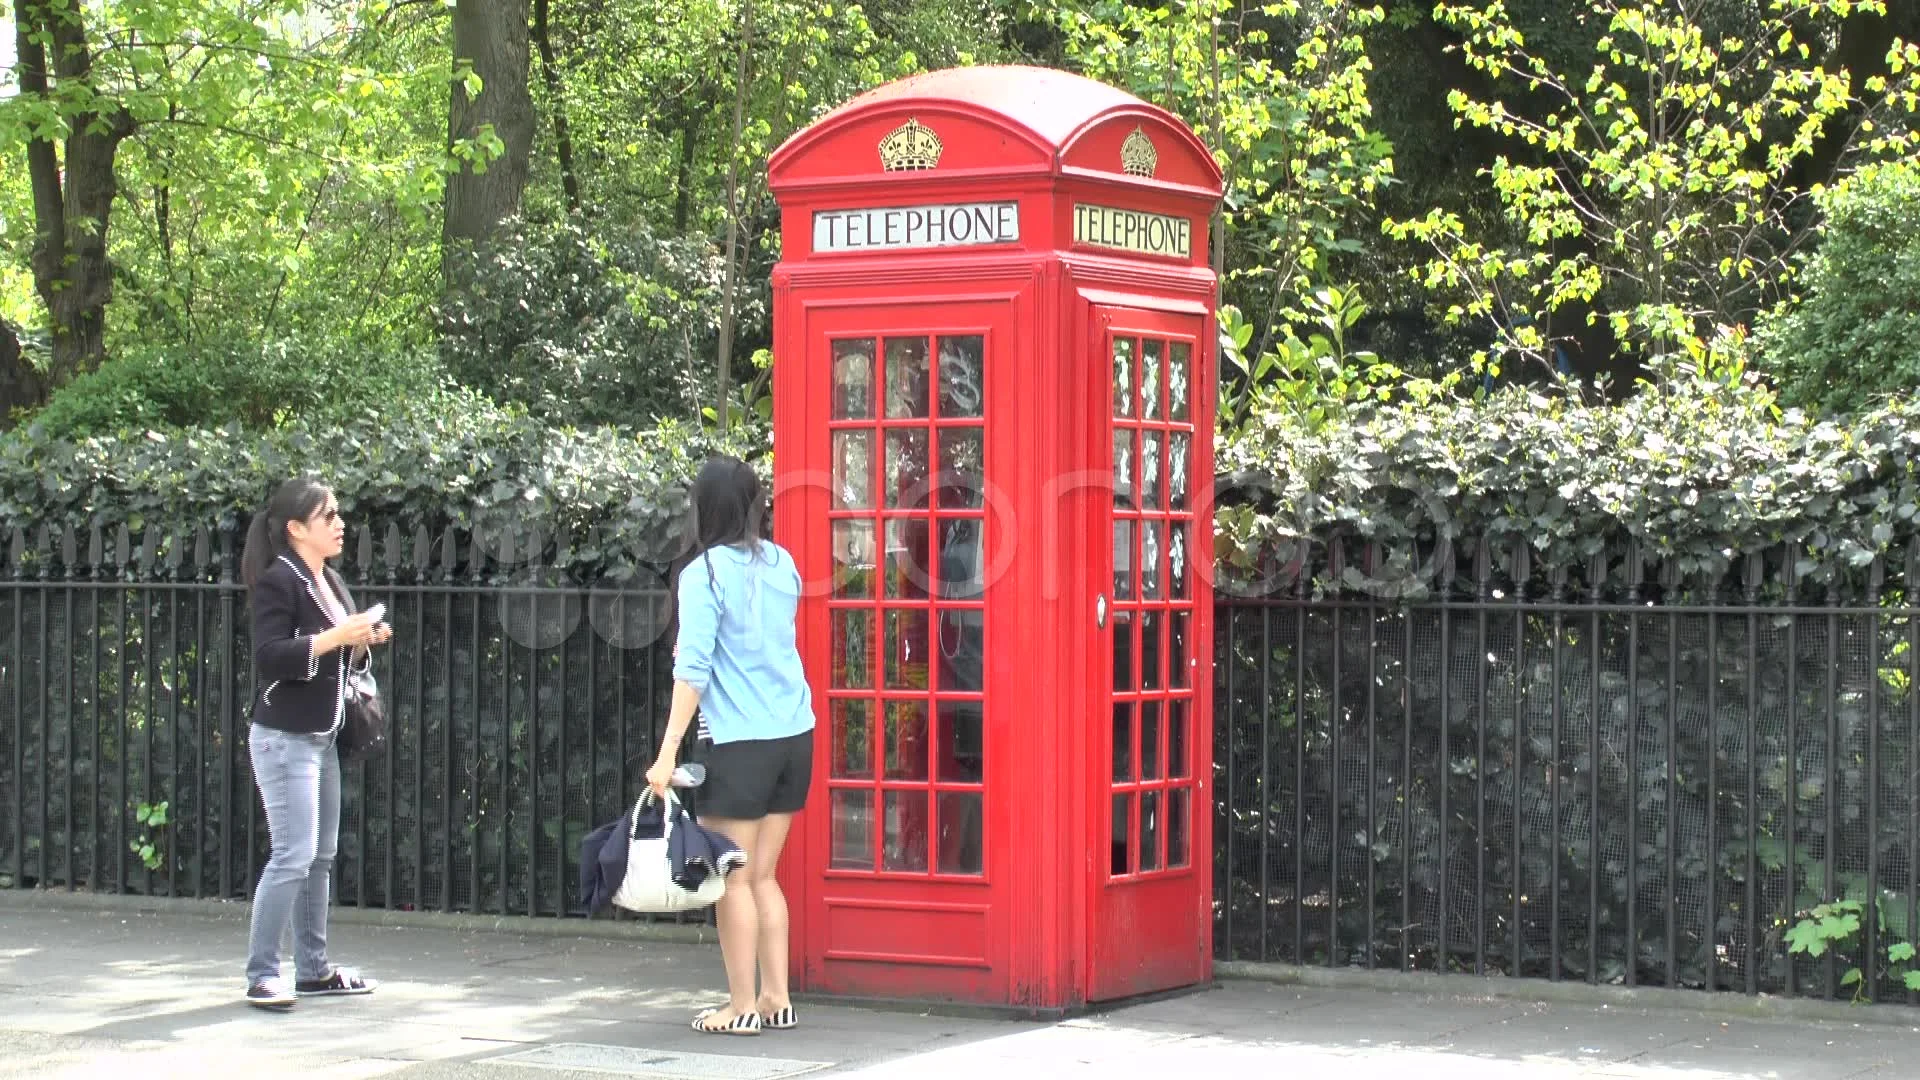 London Eye - Red Telephone Booth - Instagram Photo Spots in London | Photo  spots, London eye, Telephone booth